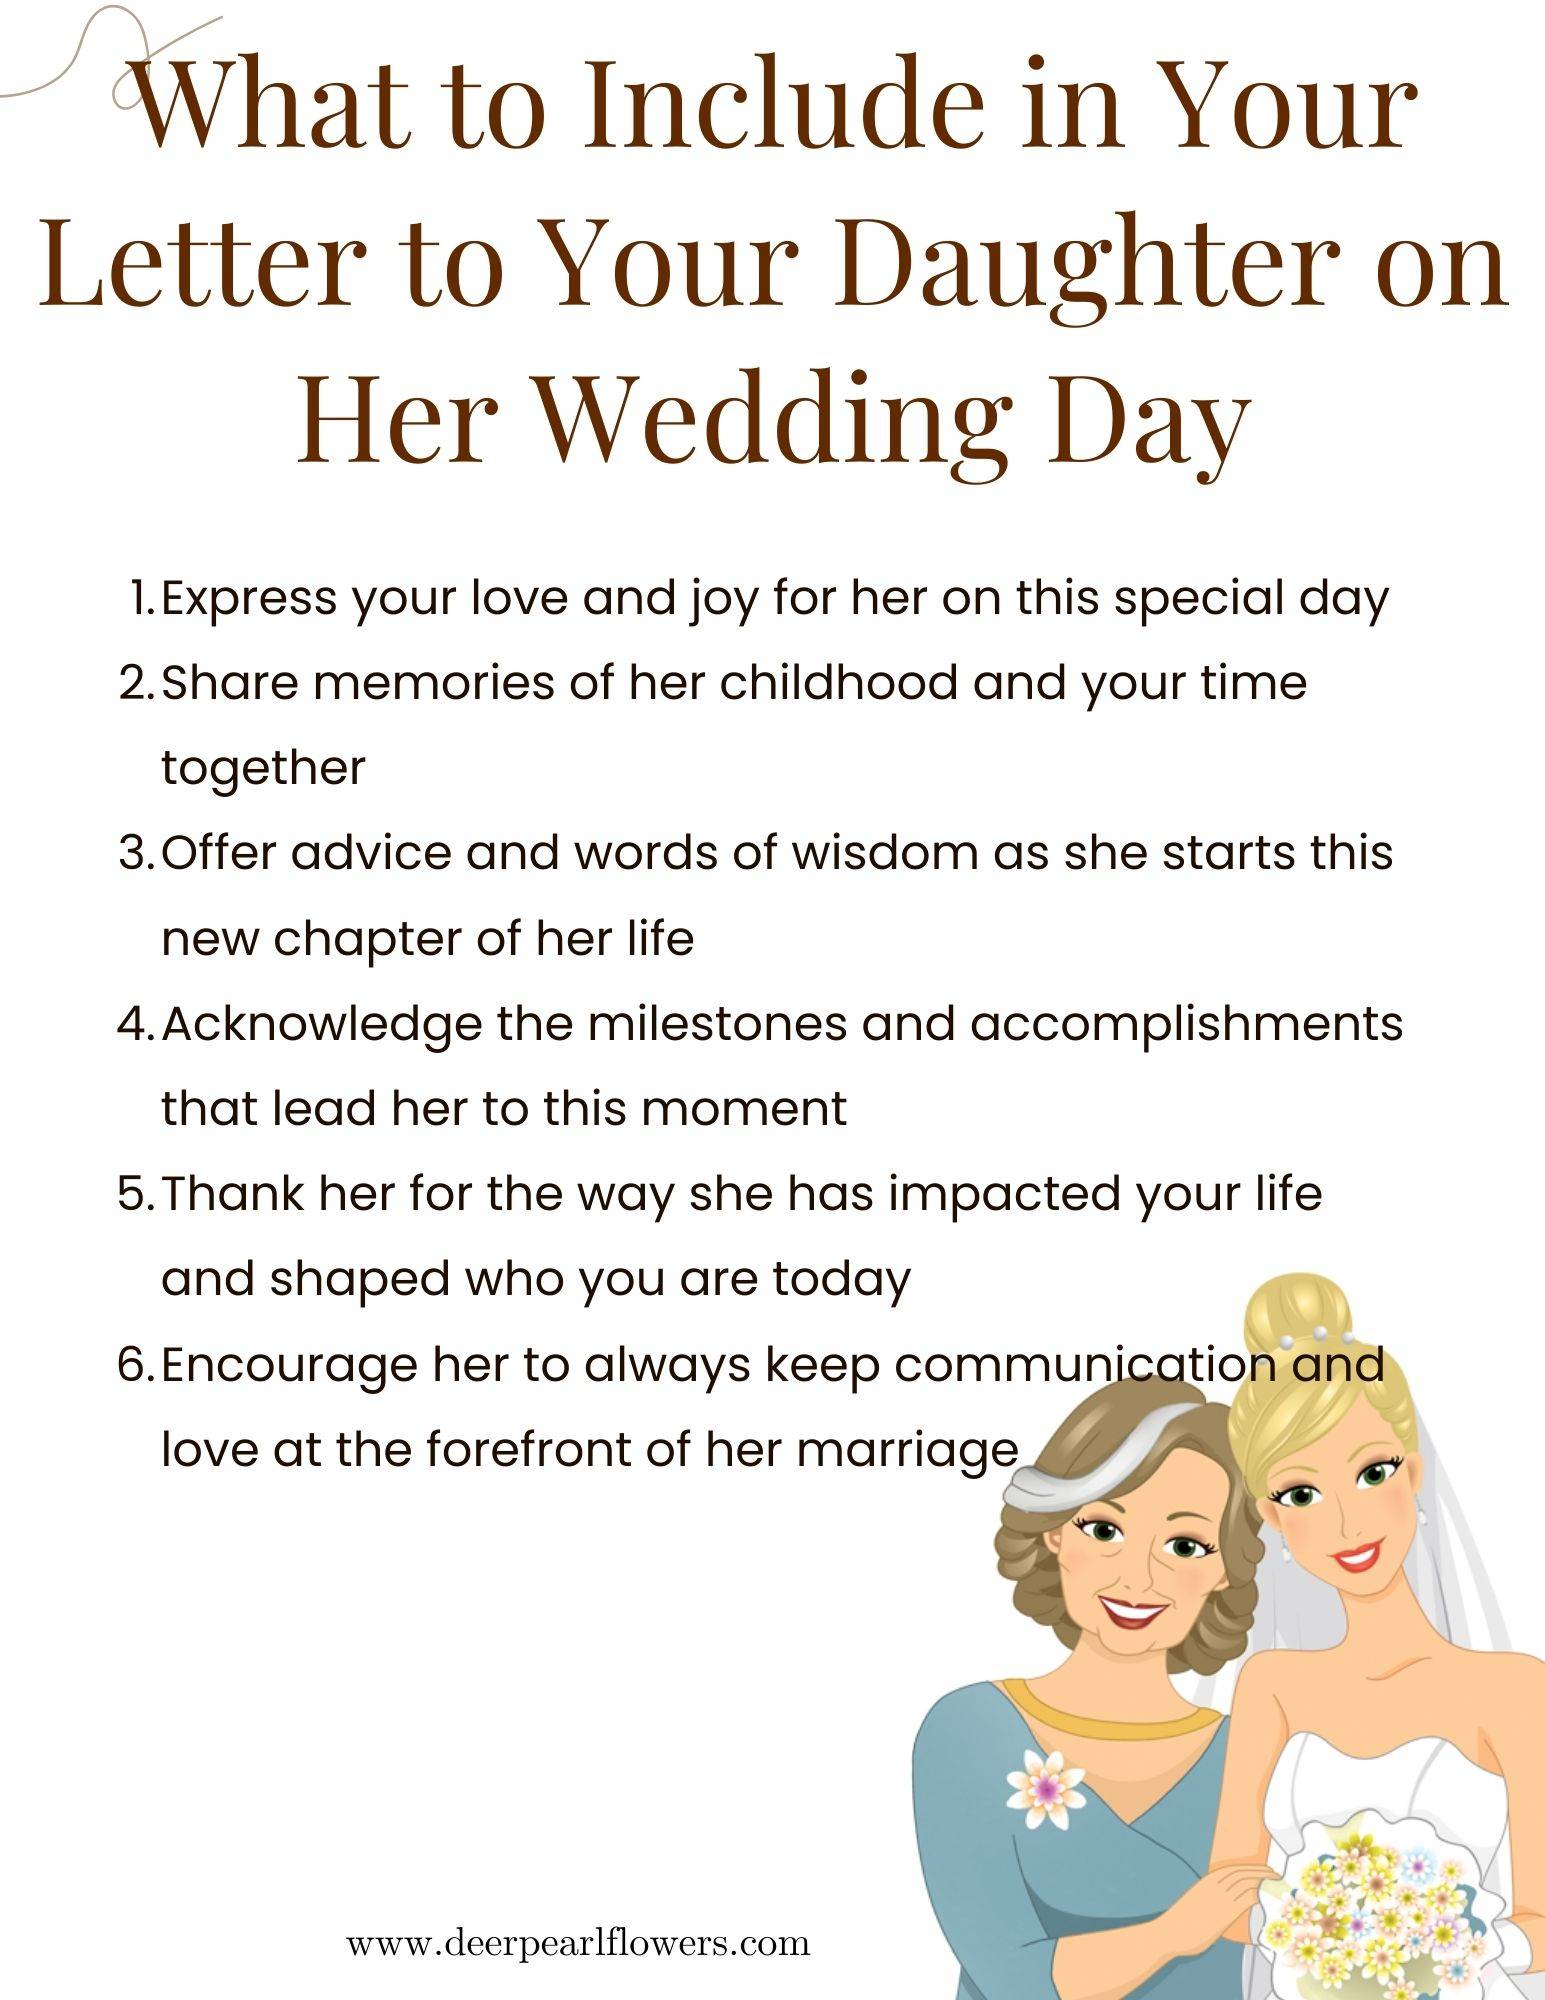 Letter to Your Daughter on Her Wedding Day